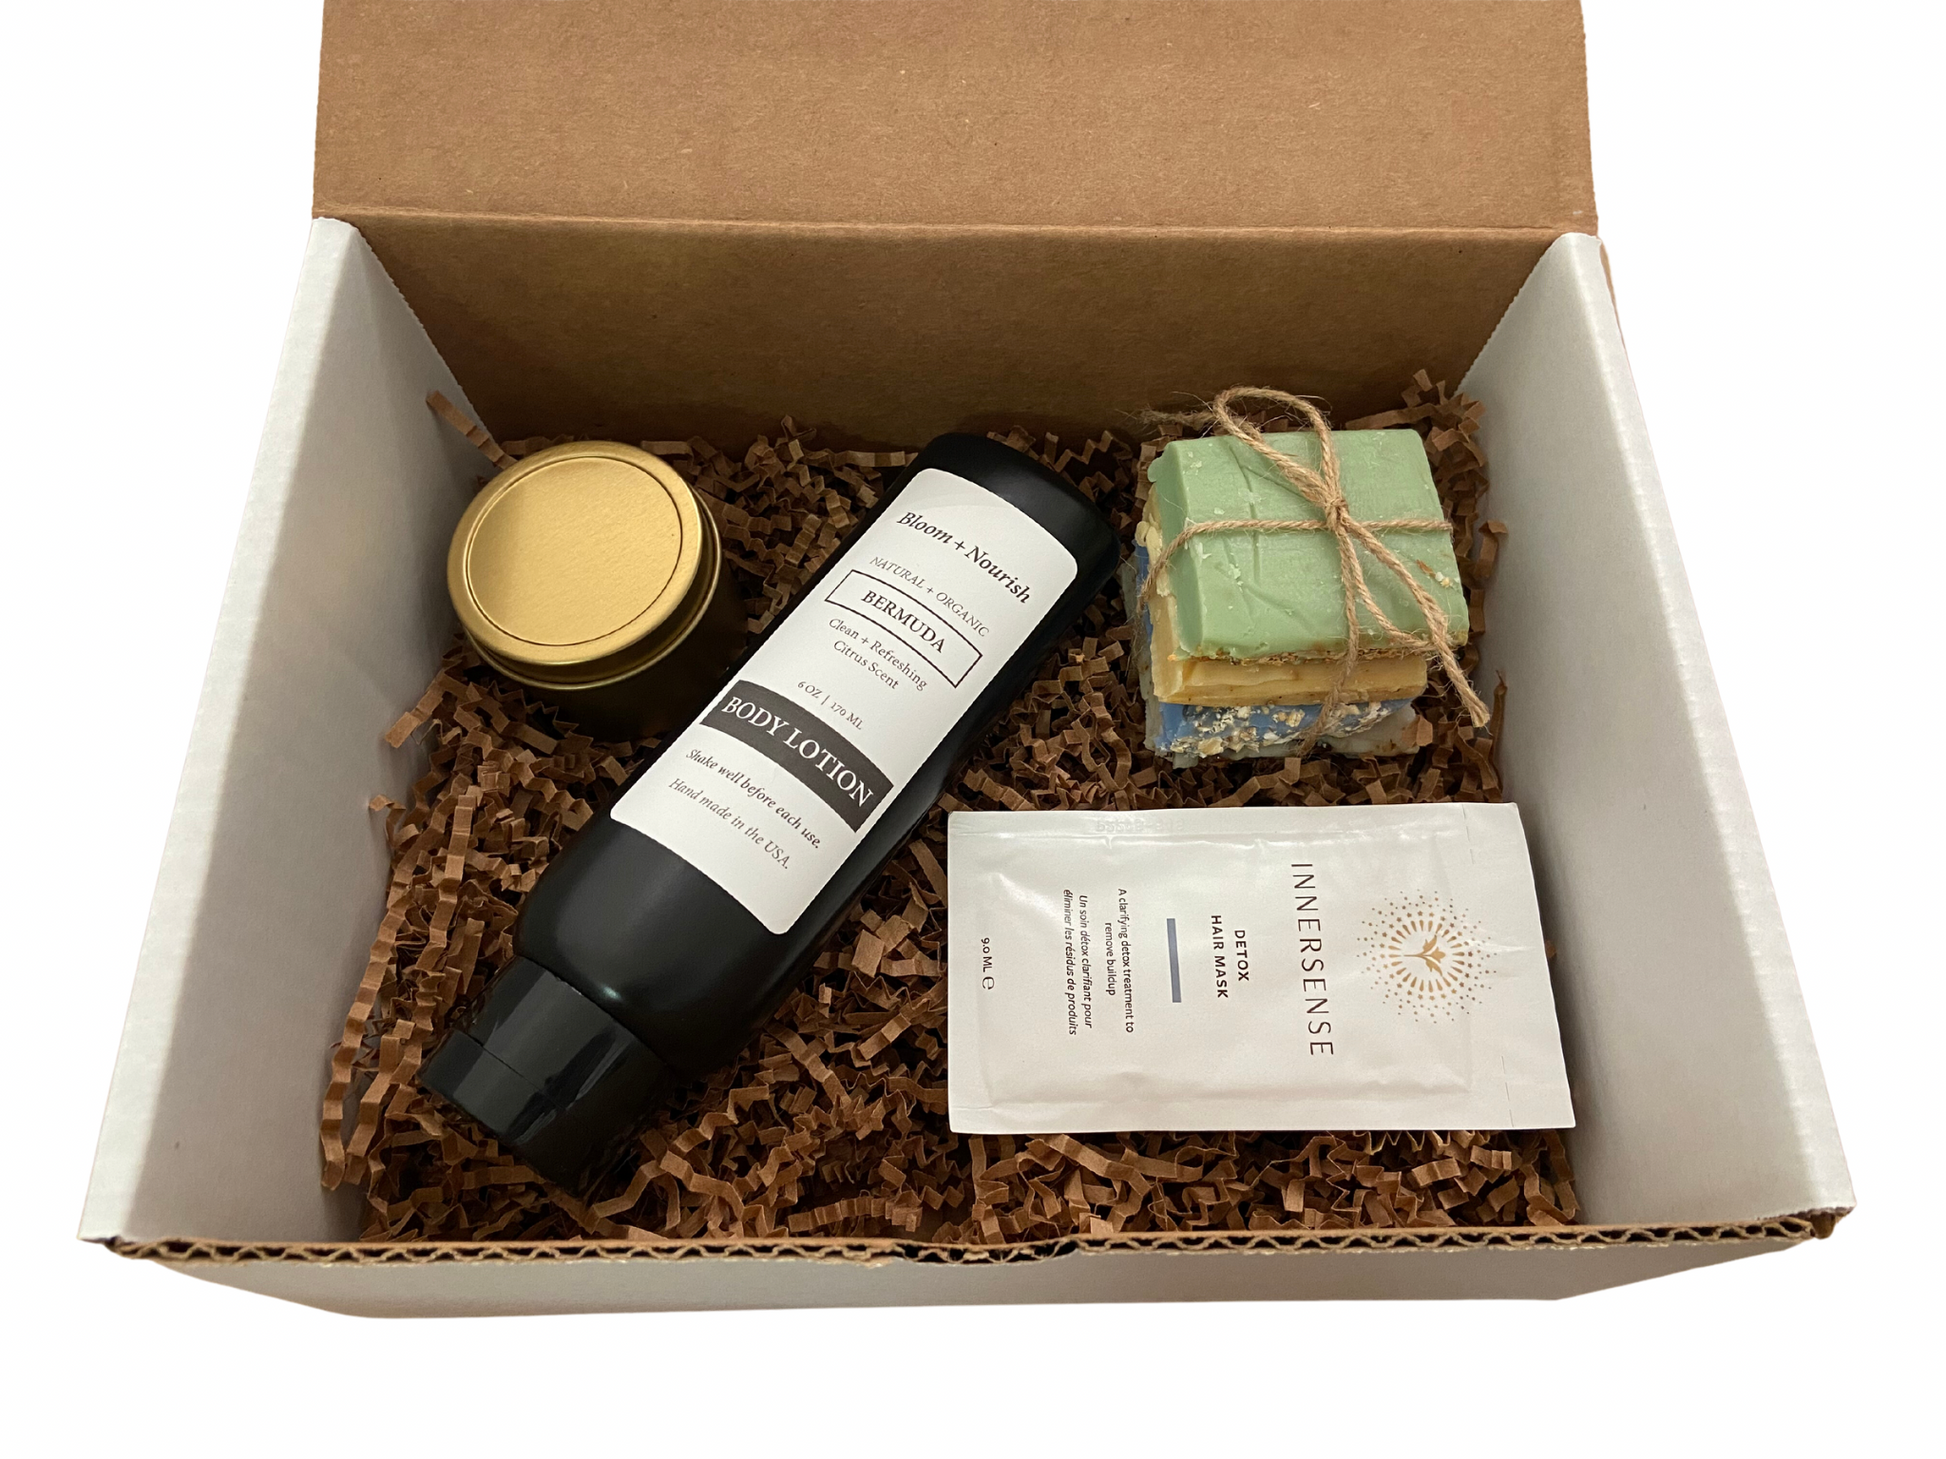 You deserve moments of self-care and relaxation. Splurge a little with our Mini Spa Box